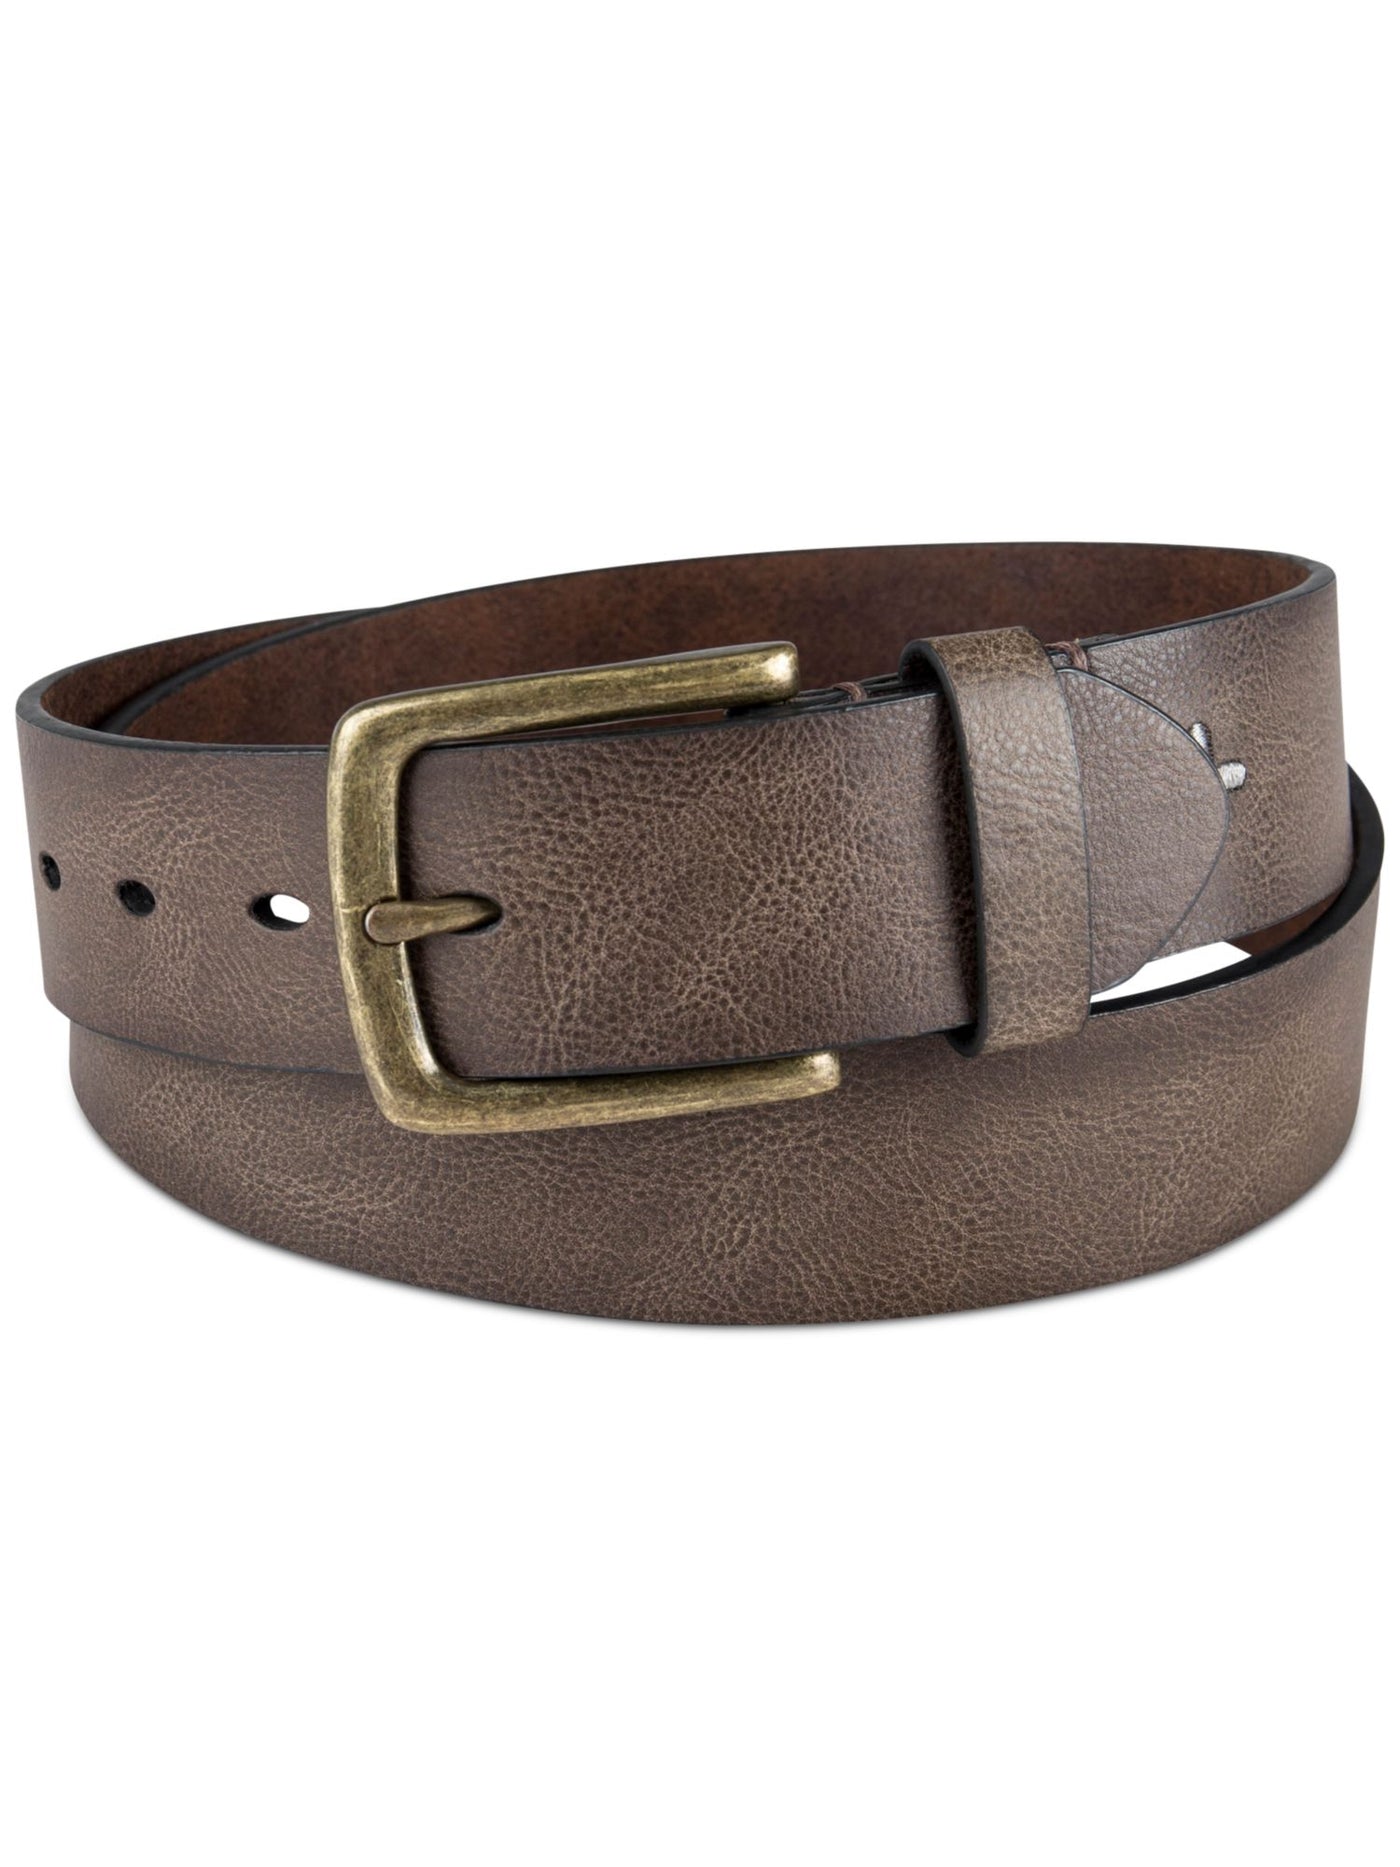 SUN STONE Mens Brown Embroidered Logo Faux Leather Casual Belt S 30-32